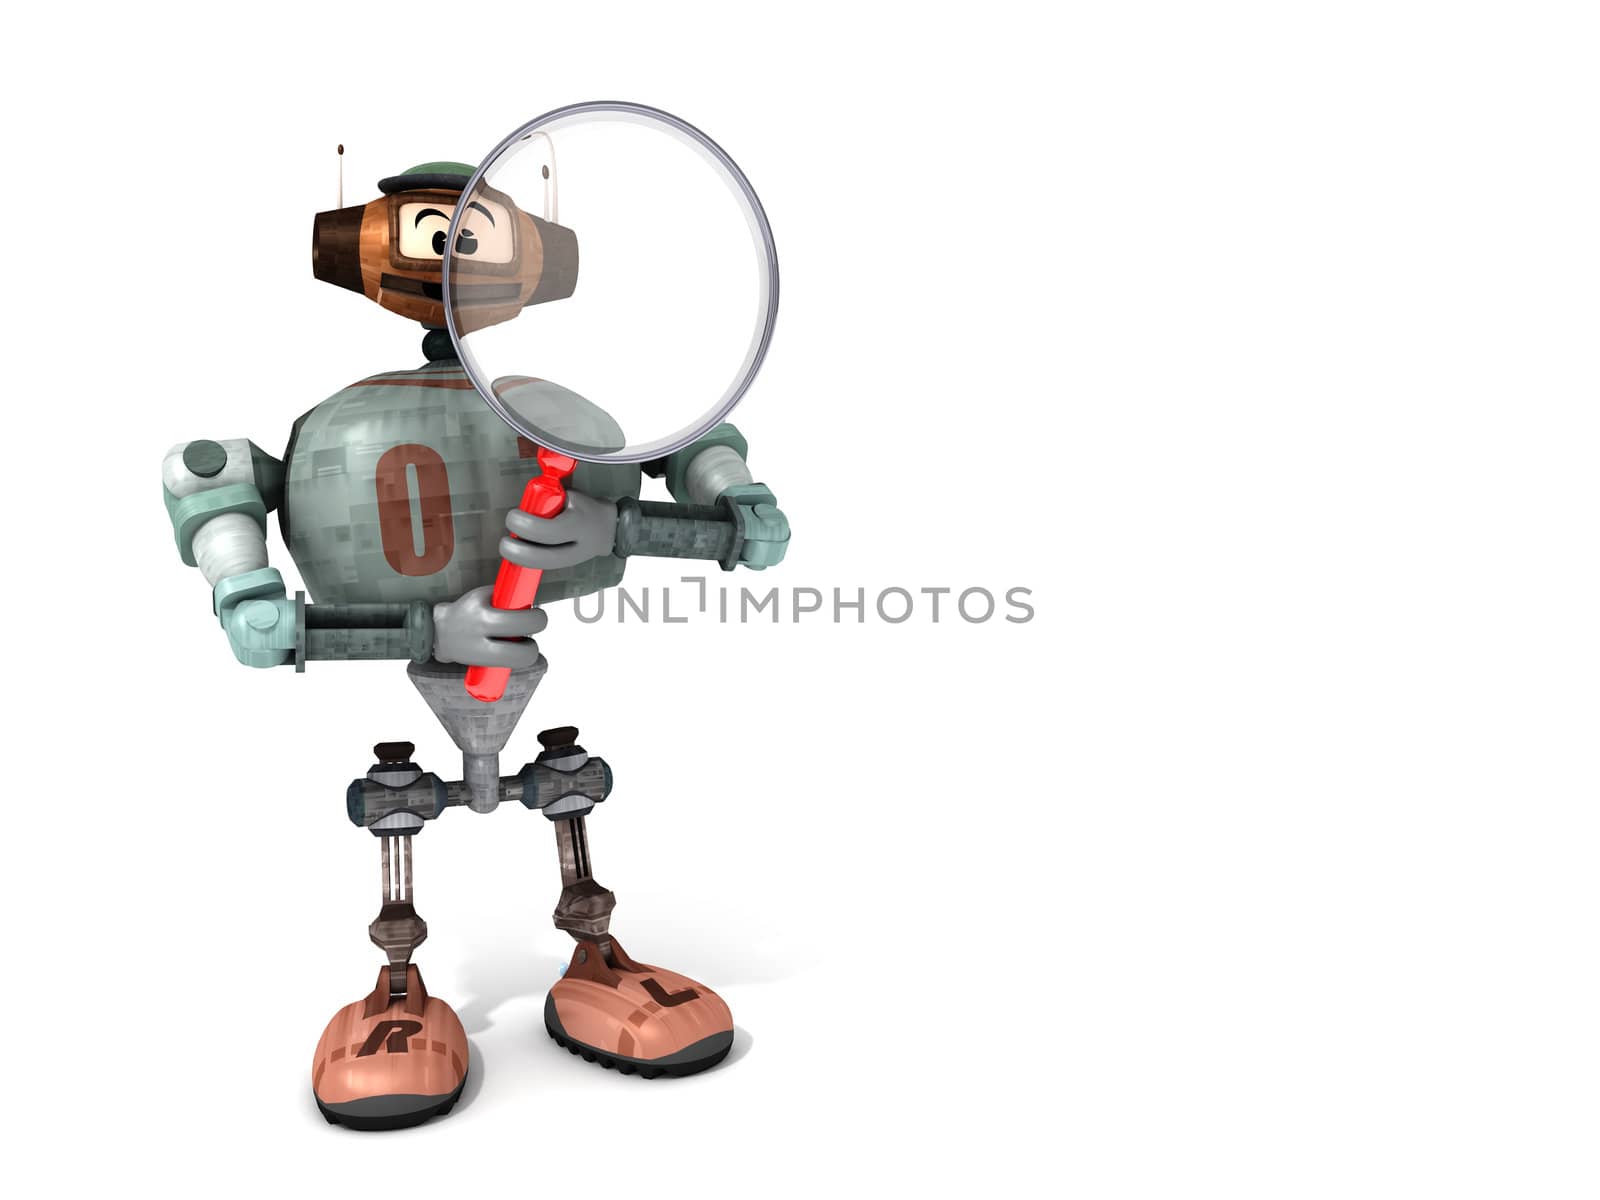 Djoby the Robot Looking Through a Magnifying Glass with a White Background